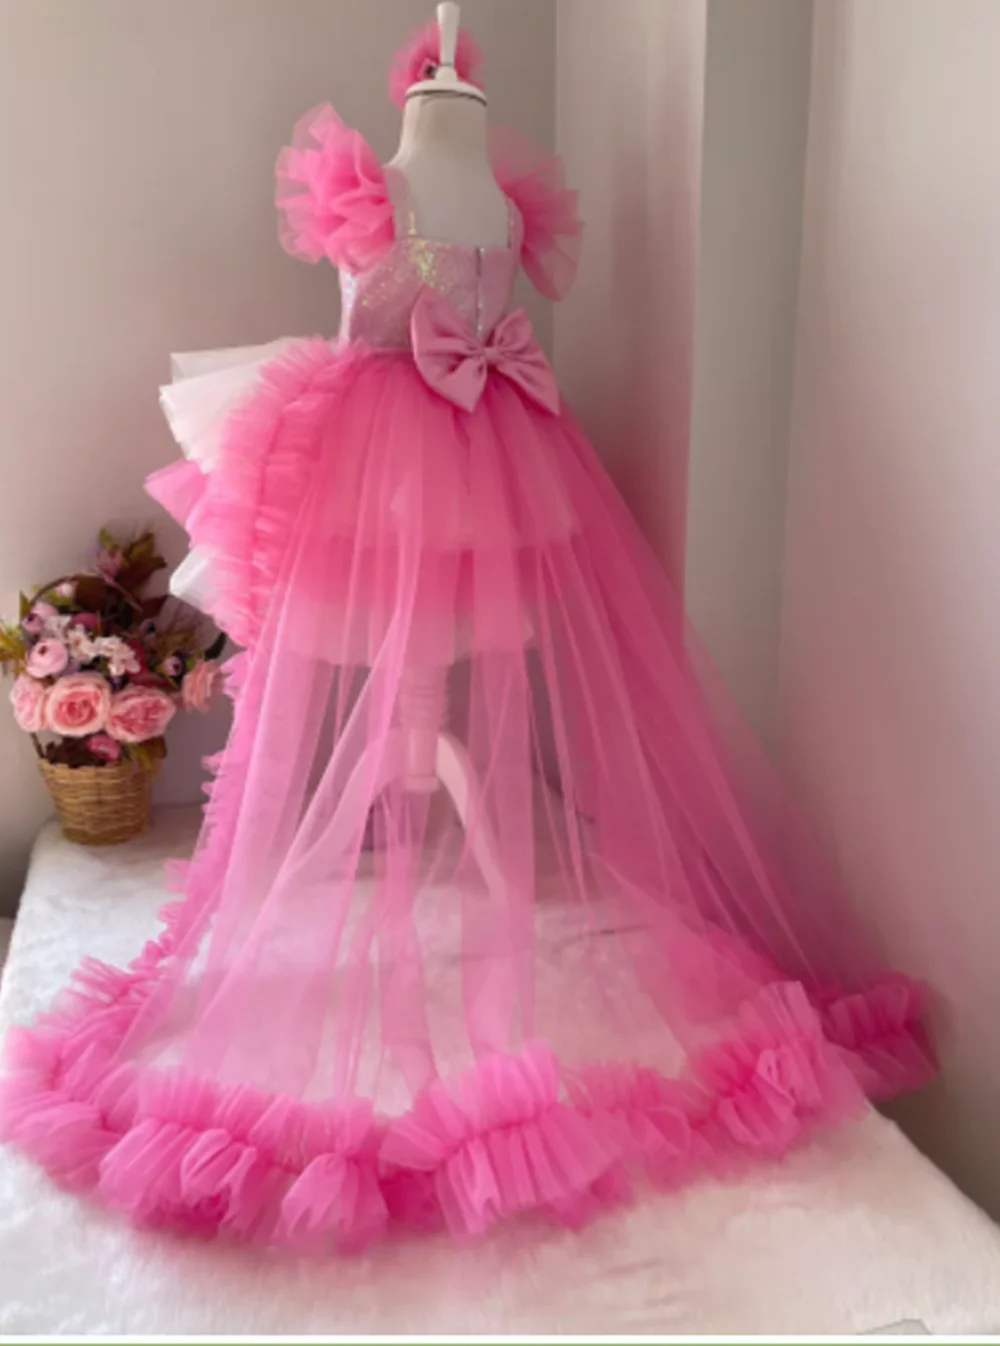 

Flower Girl Dresses Pink White Sequin Tiered Bow With Tailing Sleeveless For Wedding Birthday Party Banquet Princess Gowns